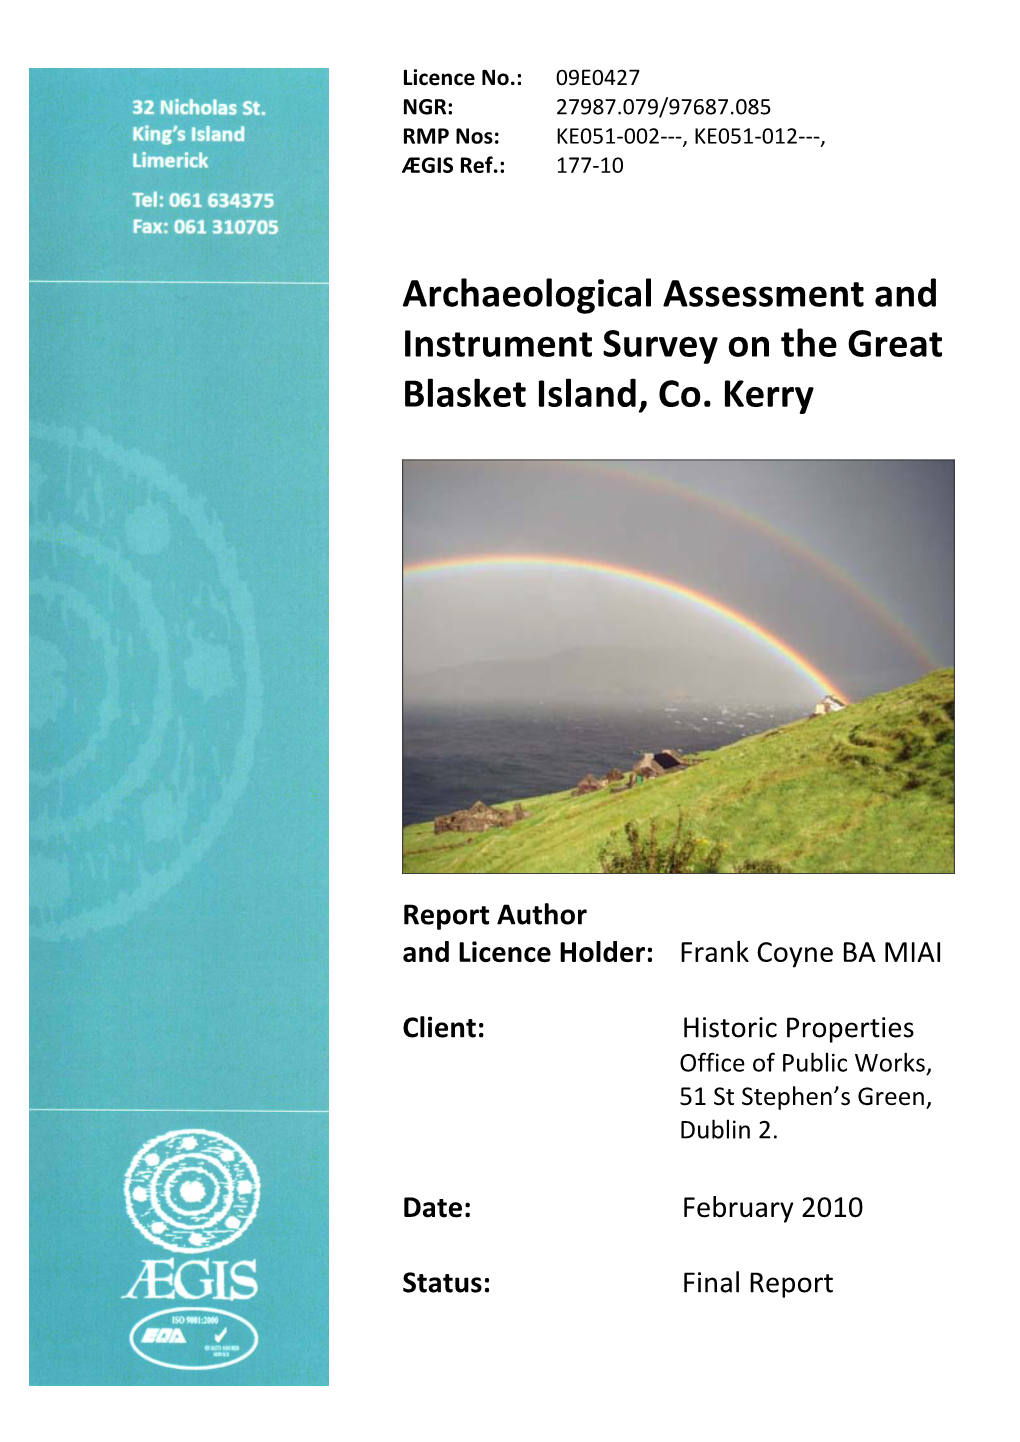 Archaeological Assessment and Instrument Survey on the Great Blasket Island, Co. Kerry